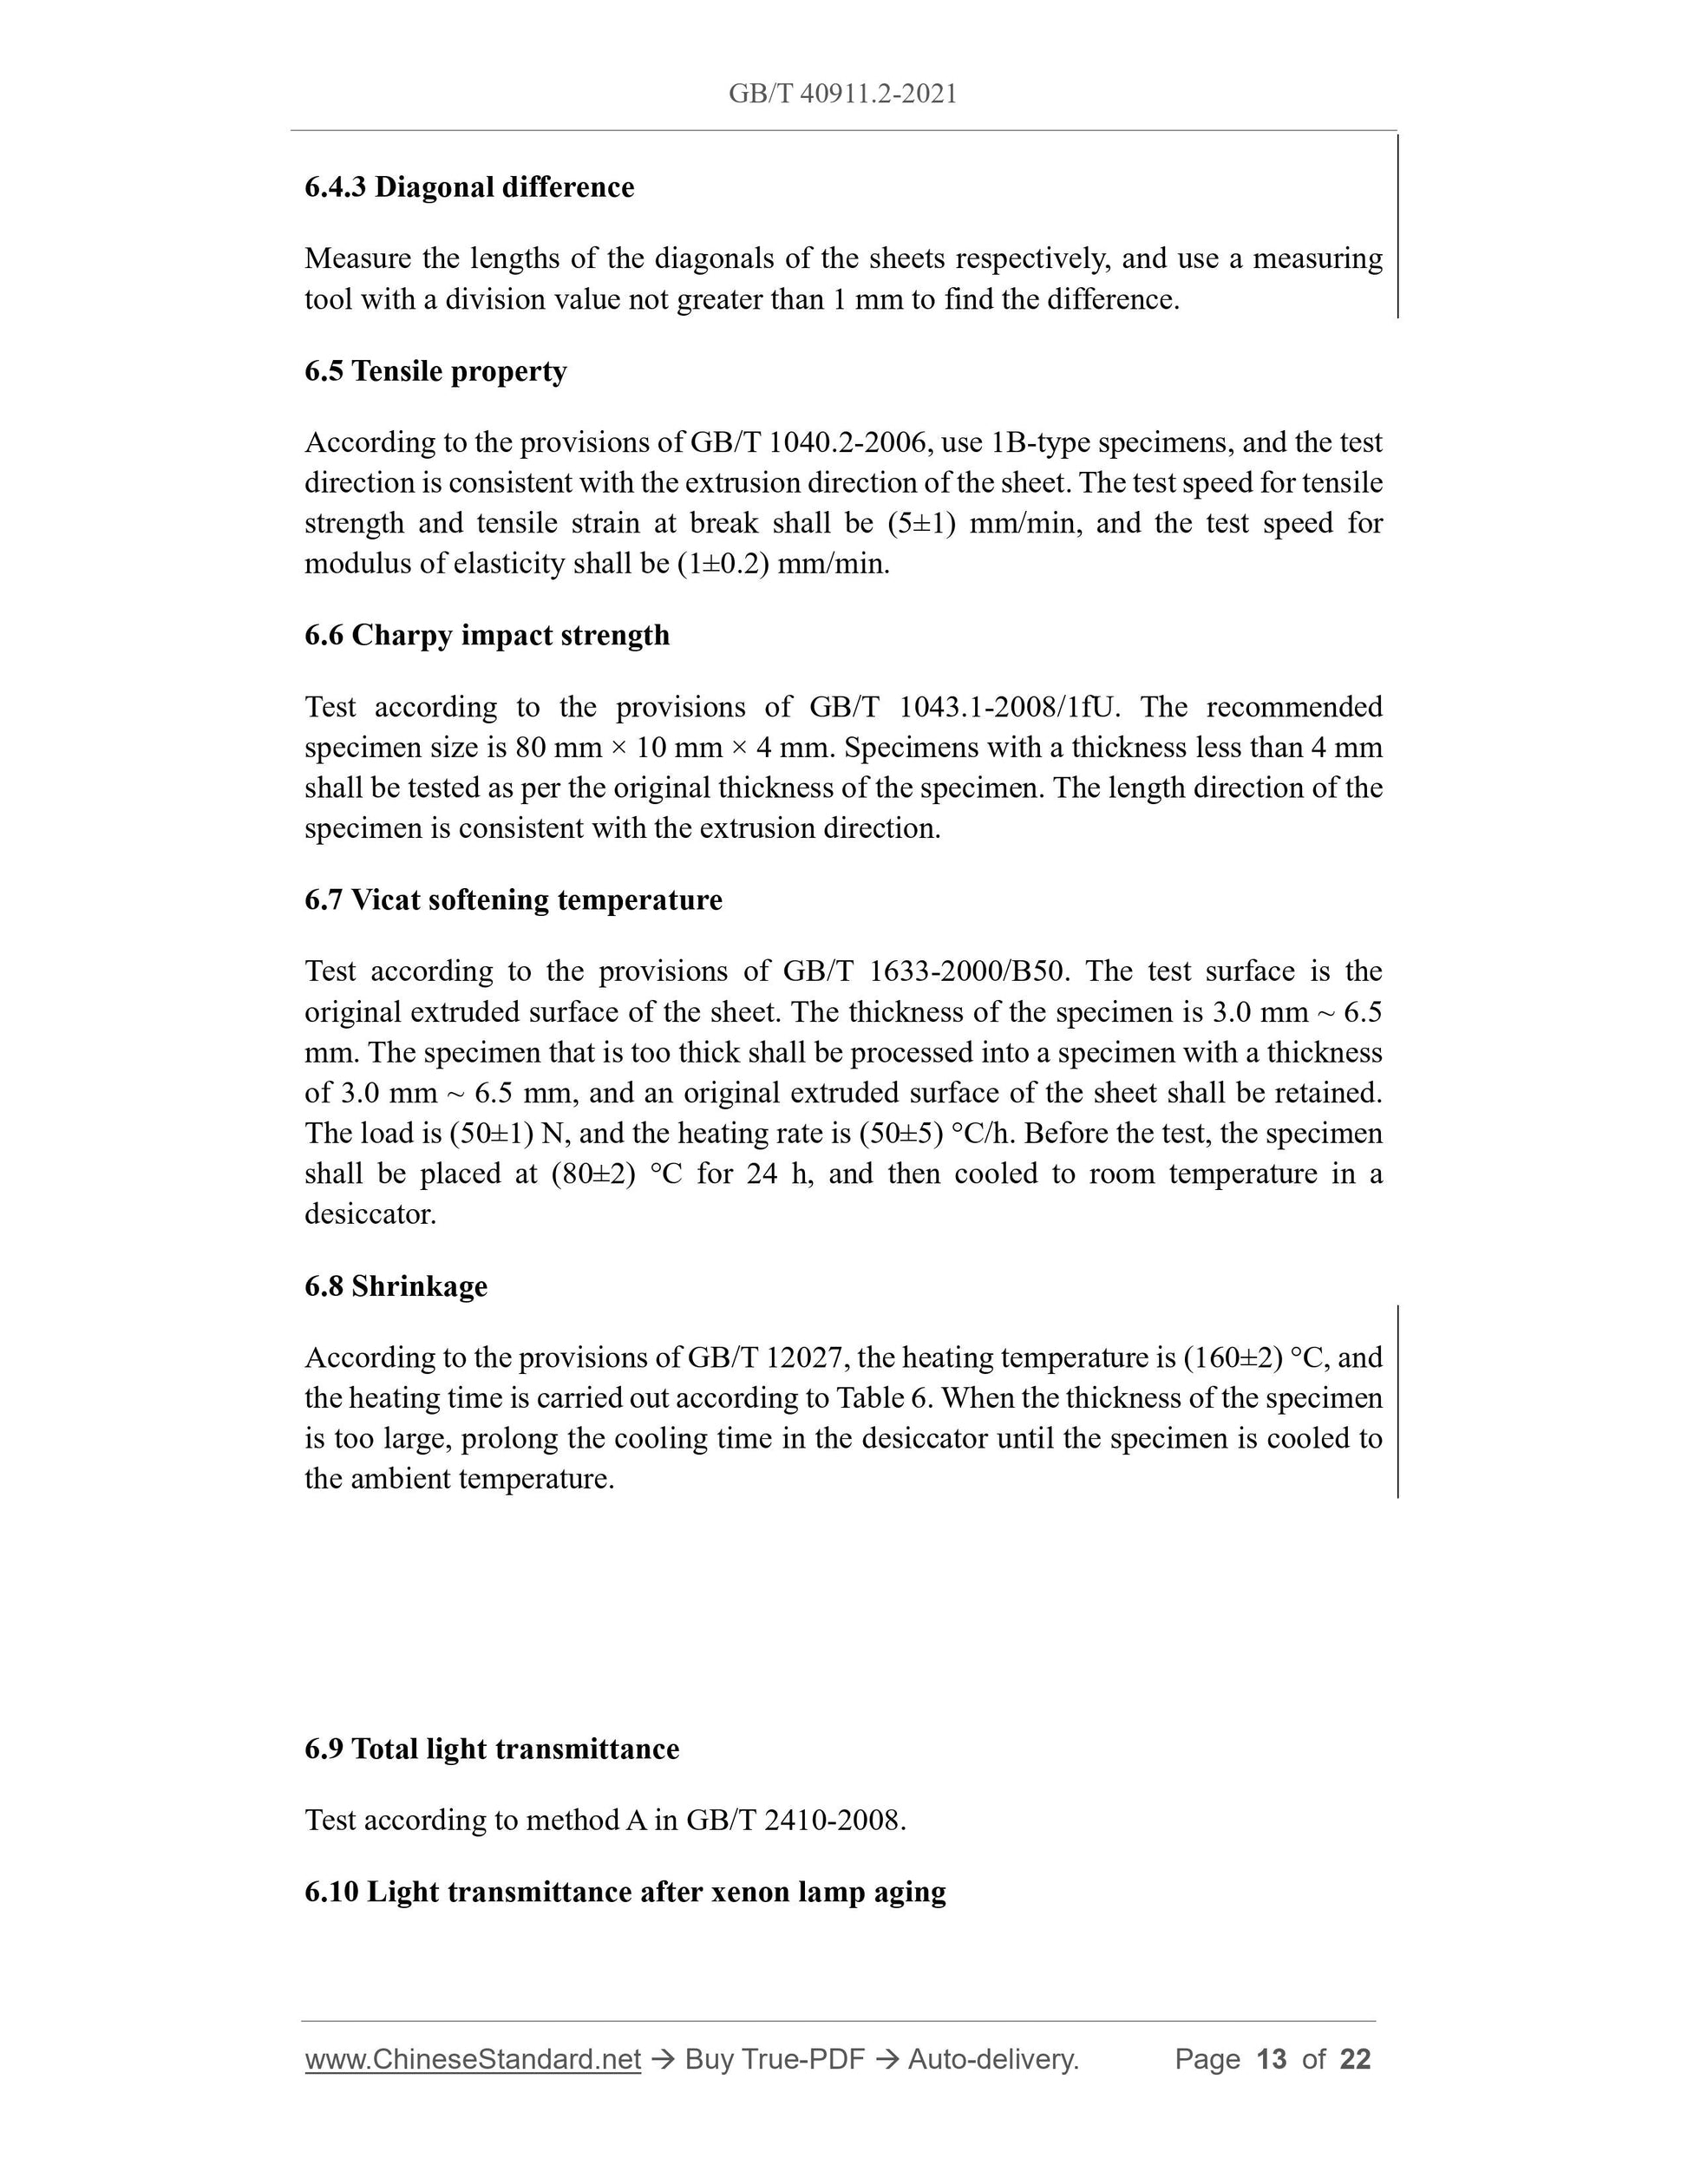 GB/T 40911.2-2021 Page 7